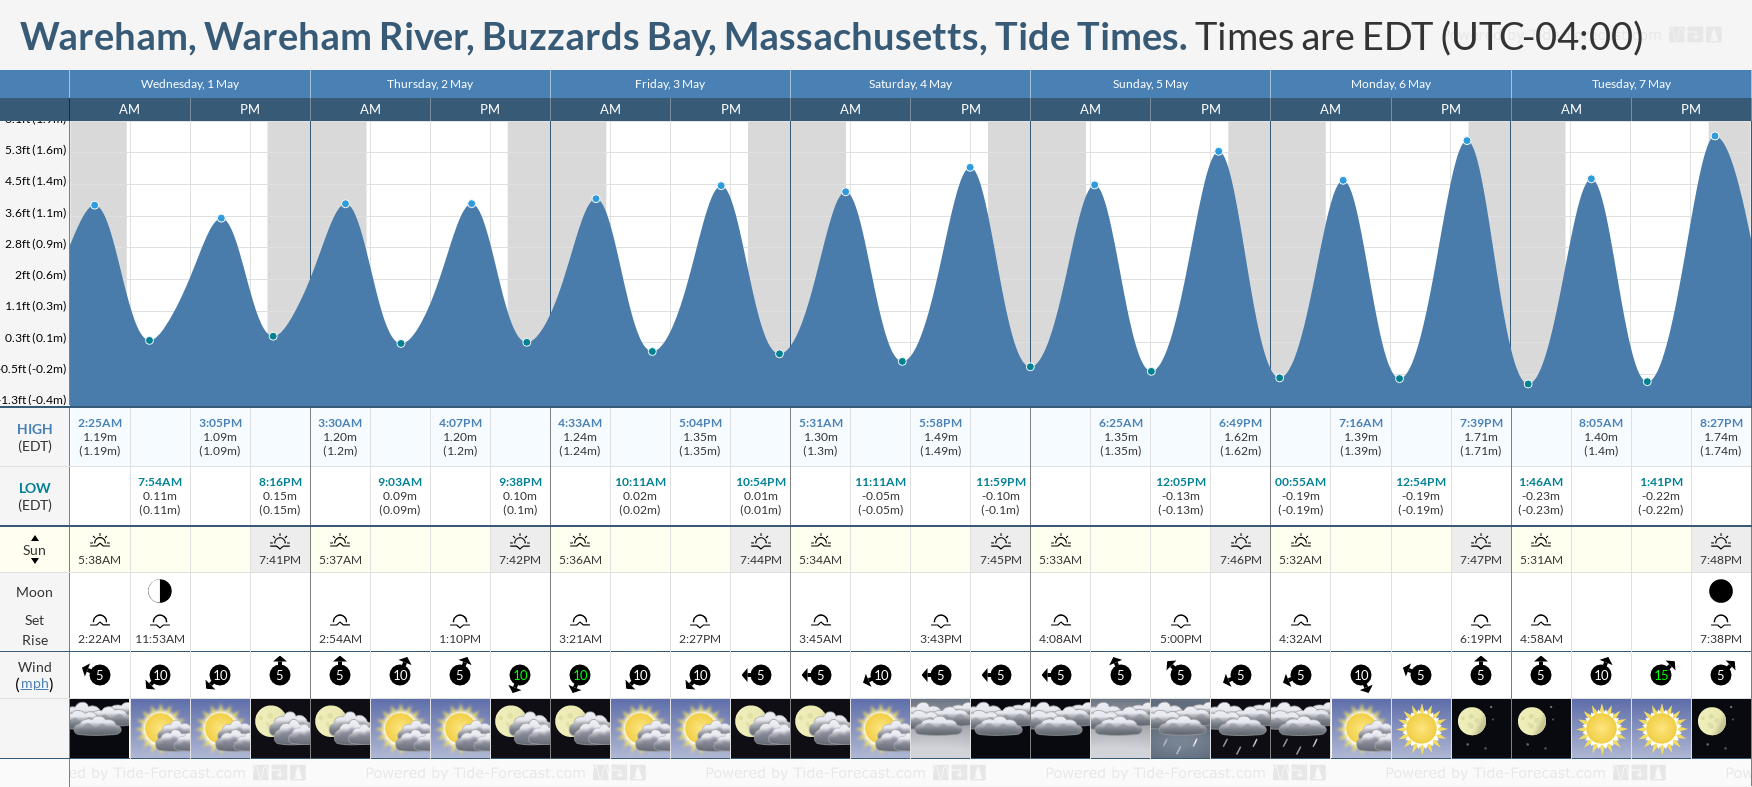 Wareham, Wareham River, Buzzards Bay, Massachusetts Tide Chart including high and low tide tide times for the next 7 days